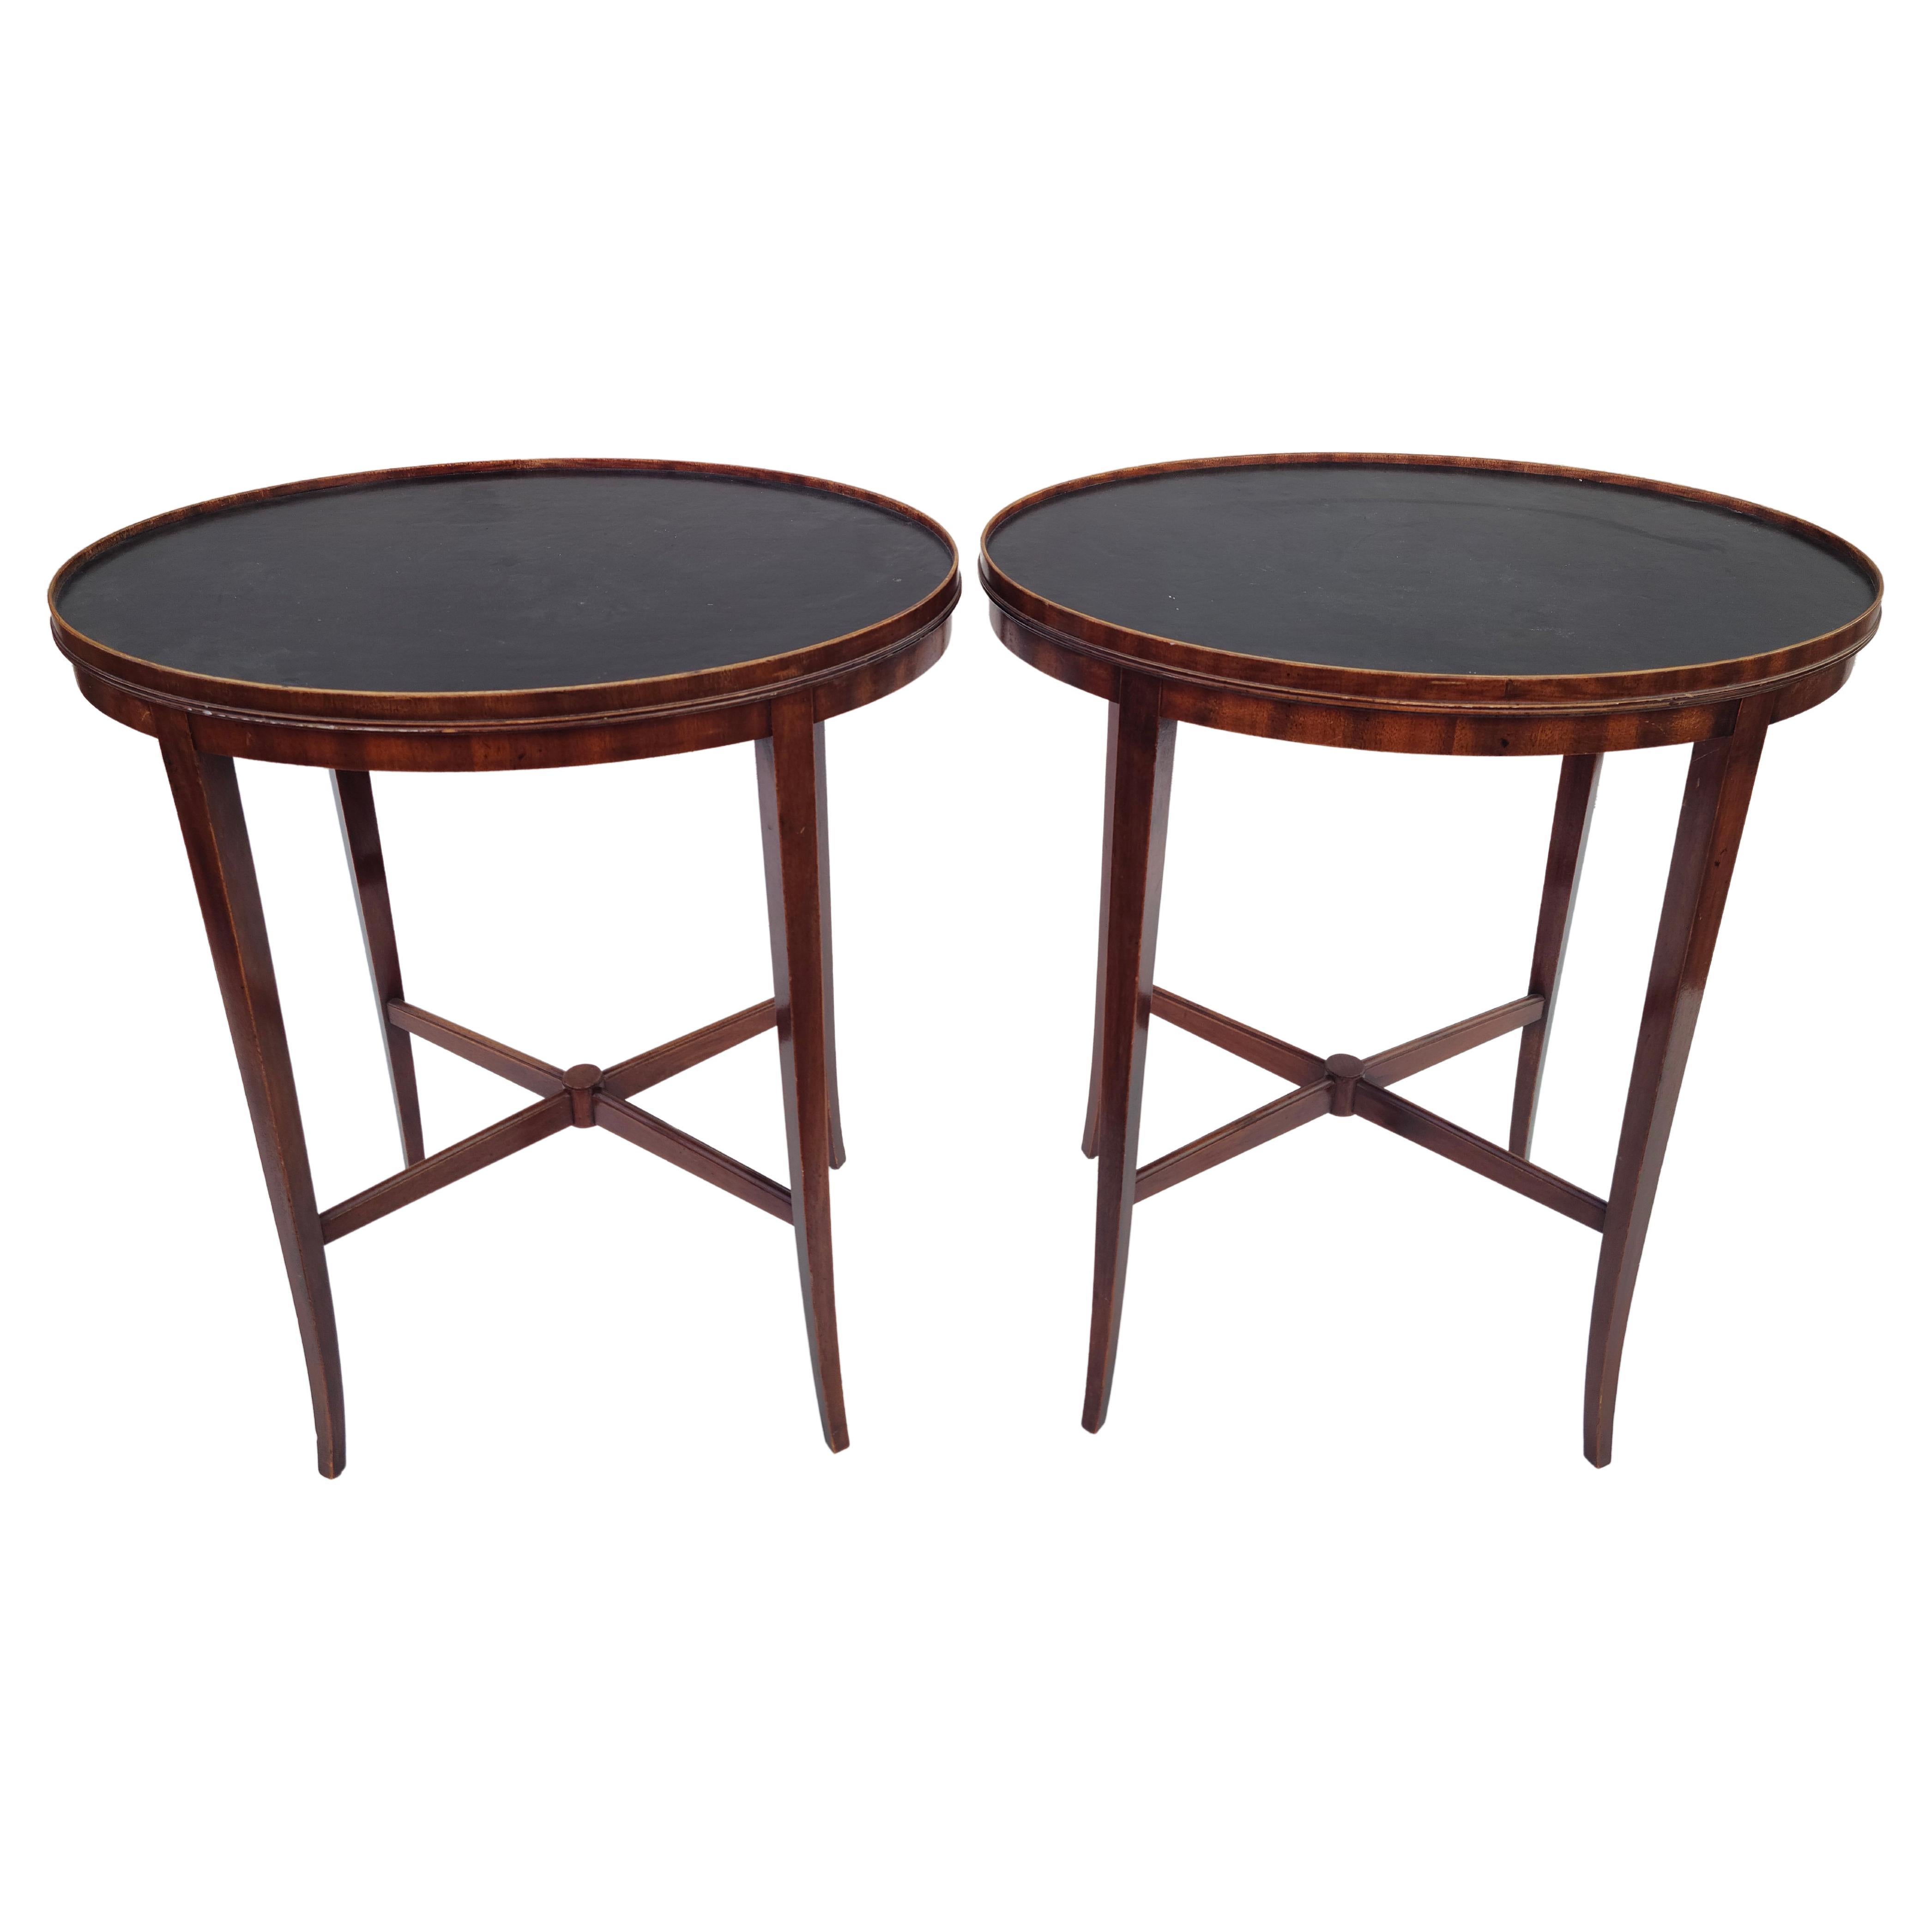 Pair saber leg oval side tables.
Black Leather top. Mahogany construction.
Seems to follow design cues similarly used by Tommi Parzinger.
Does not have Charak label. 